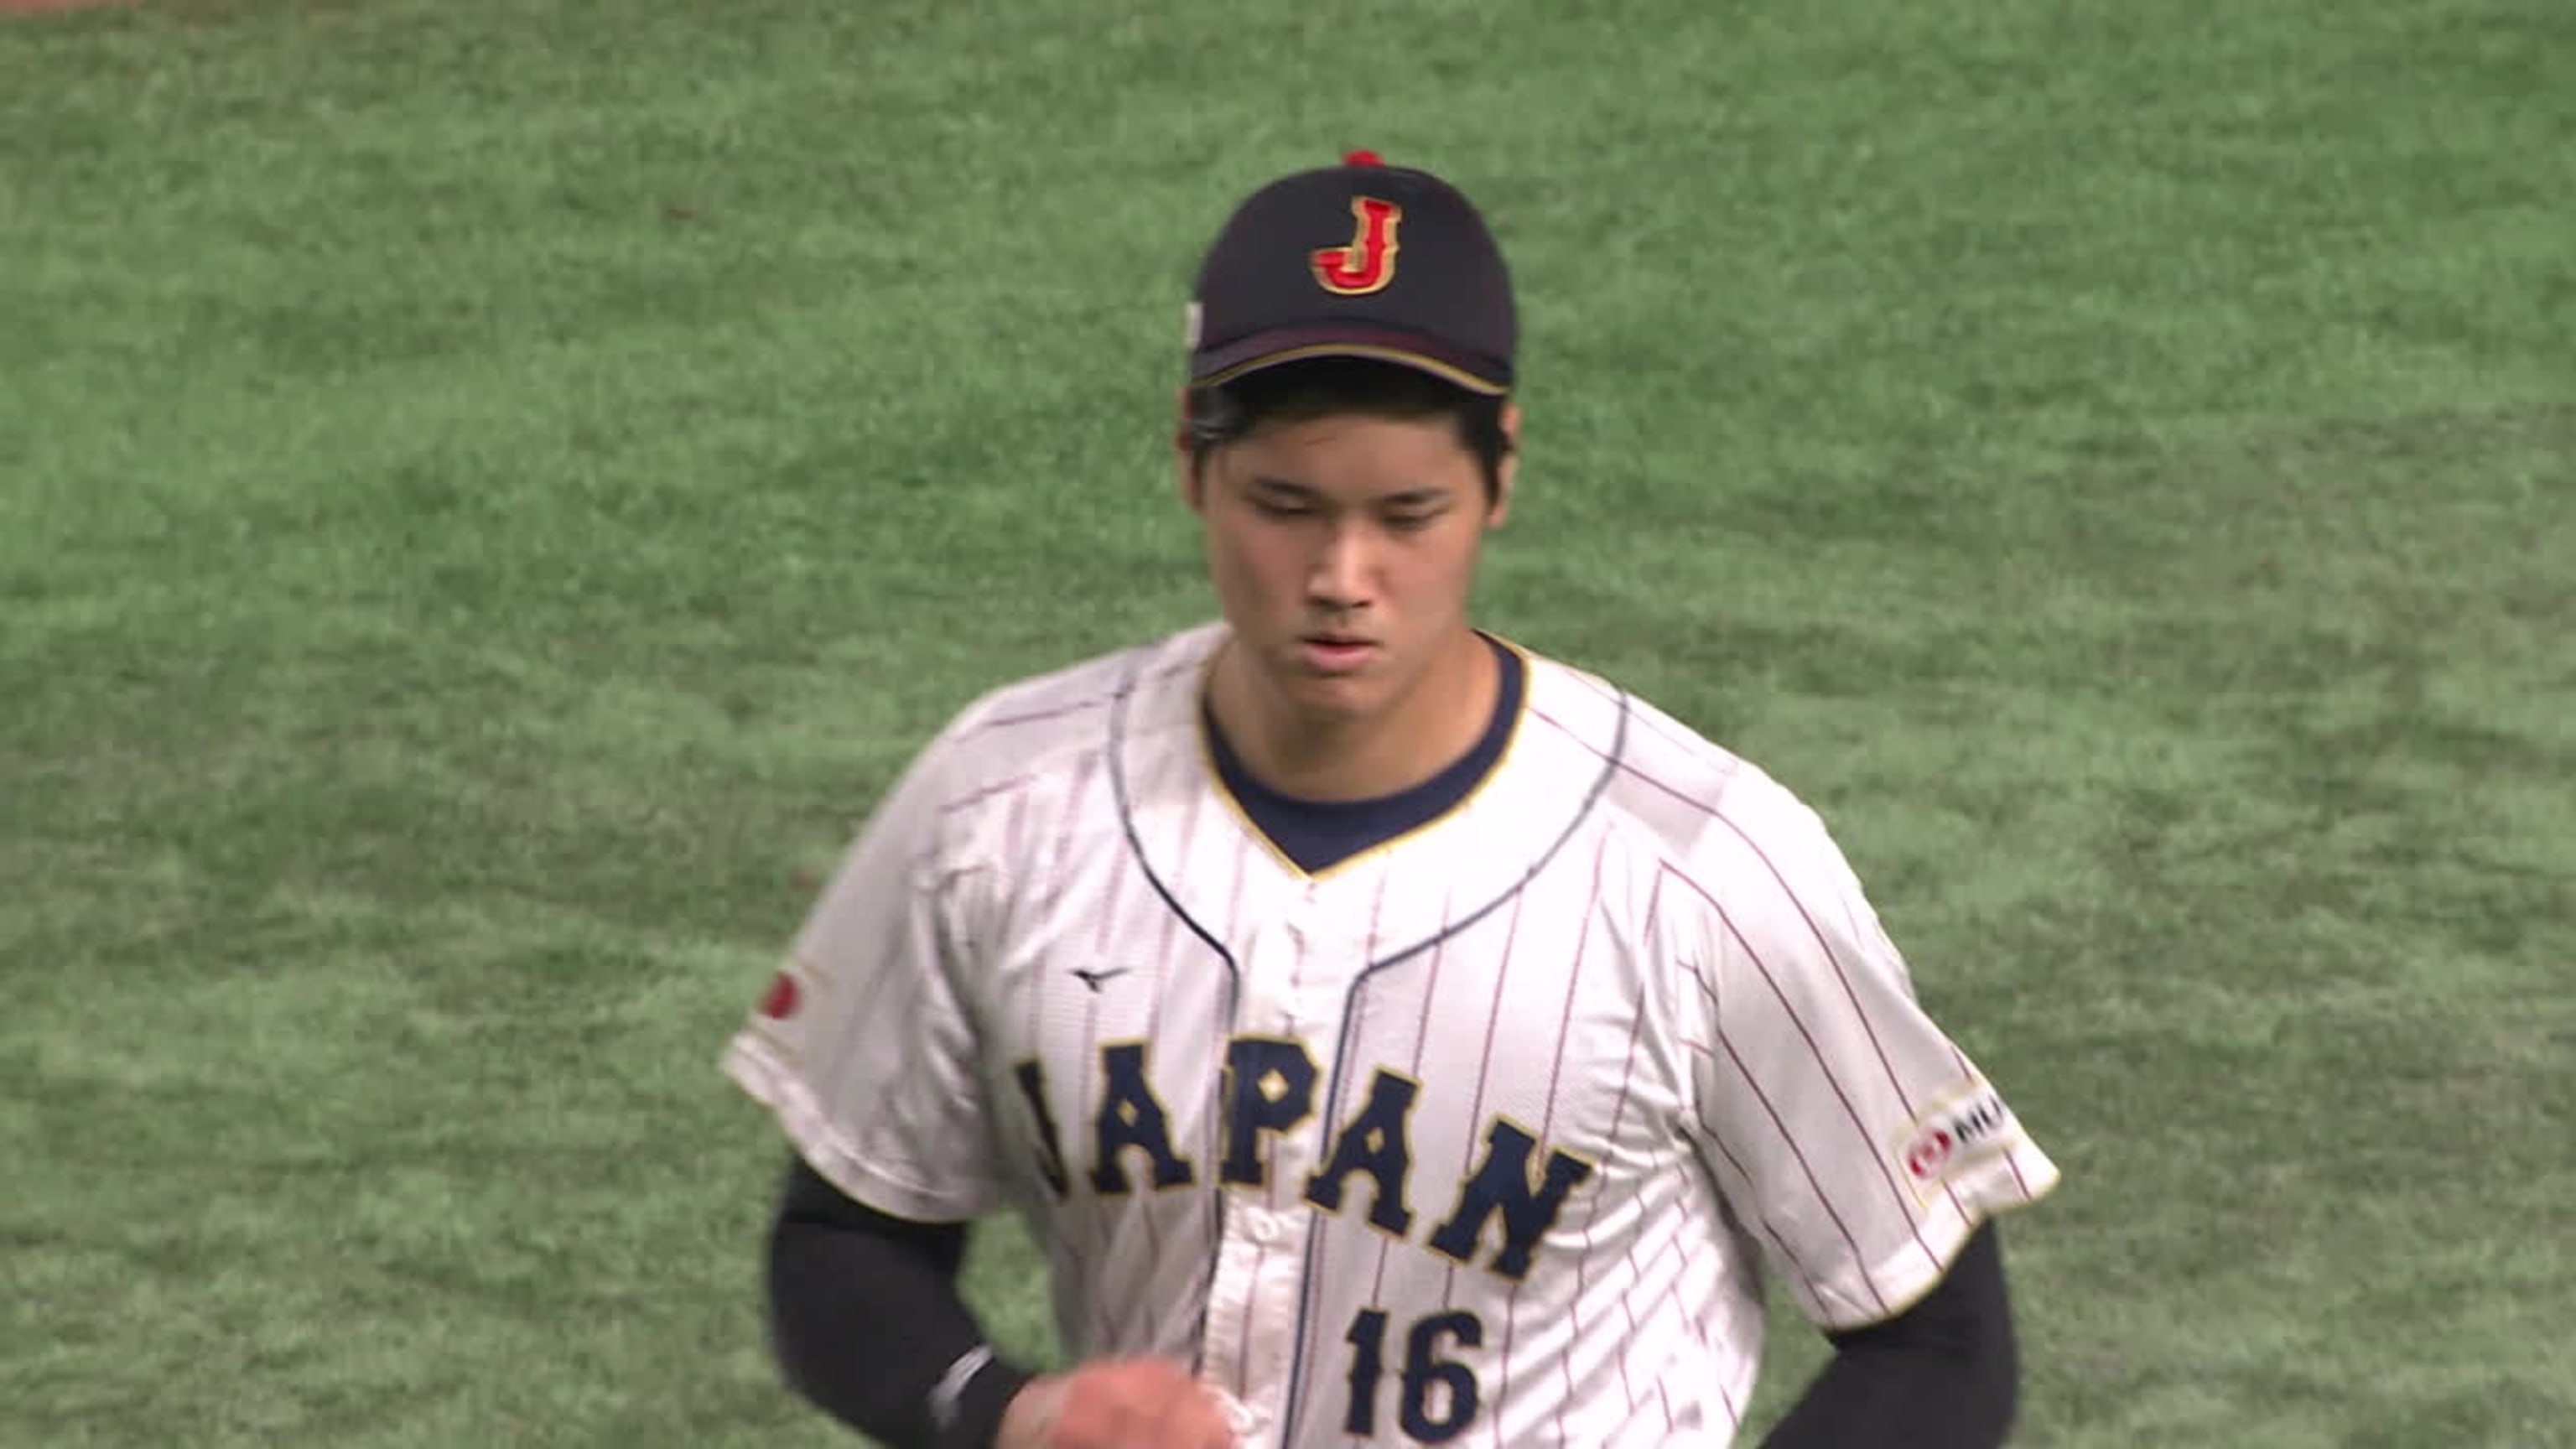 Ohtani sets new personal record for fastest pitch